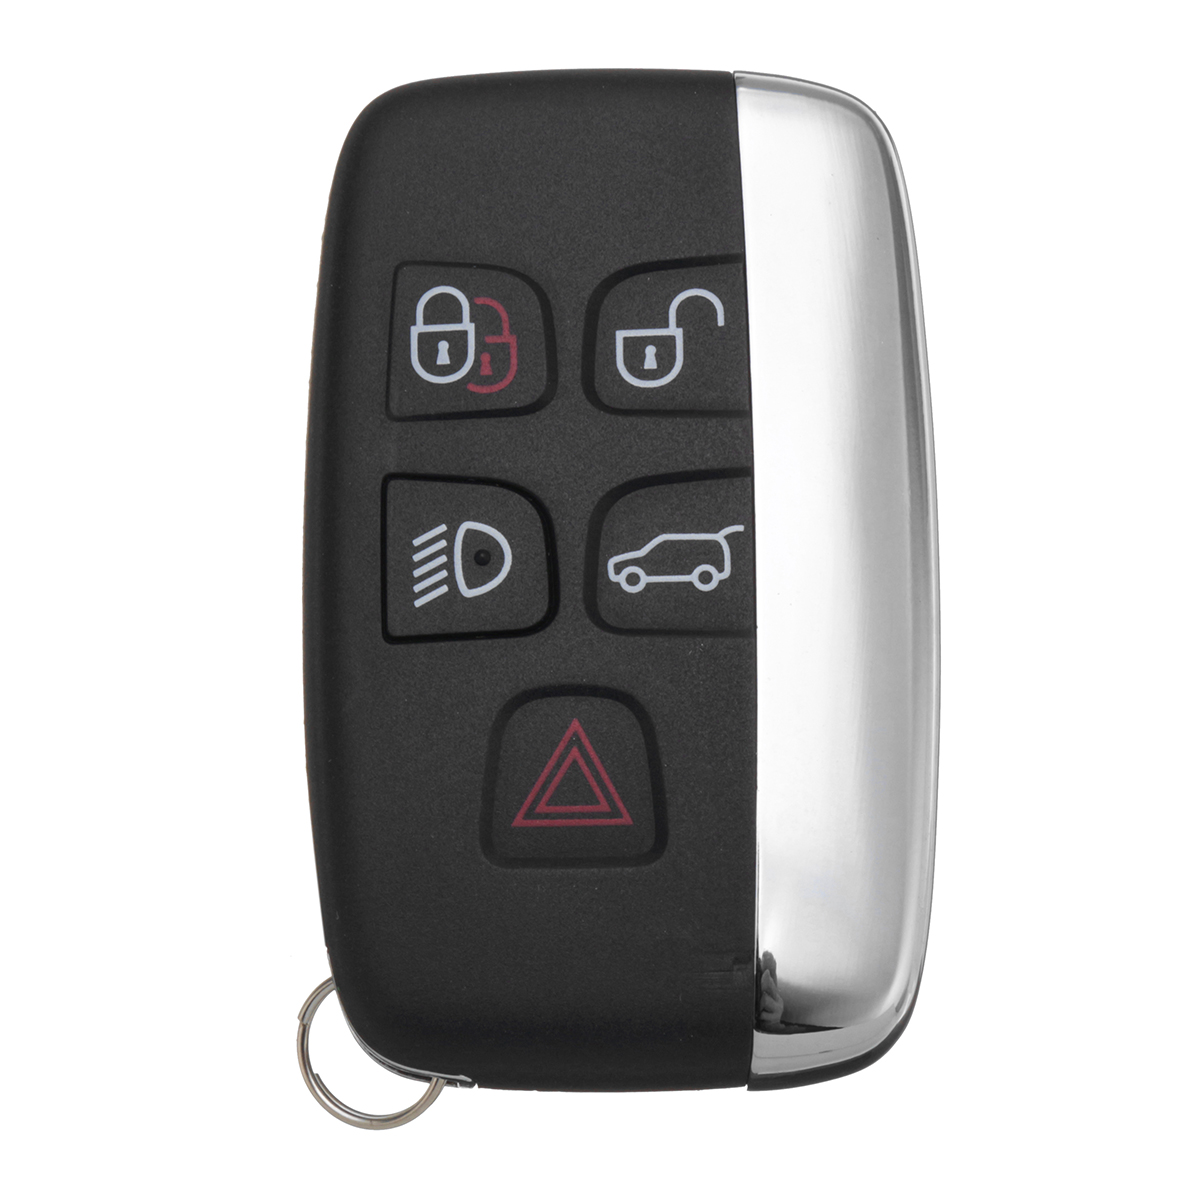 UK 315MHz 5 Buttons Remote Smart Key Fob For Land Rover Discovery 4 Freelander 2